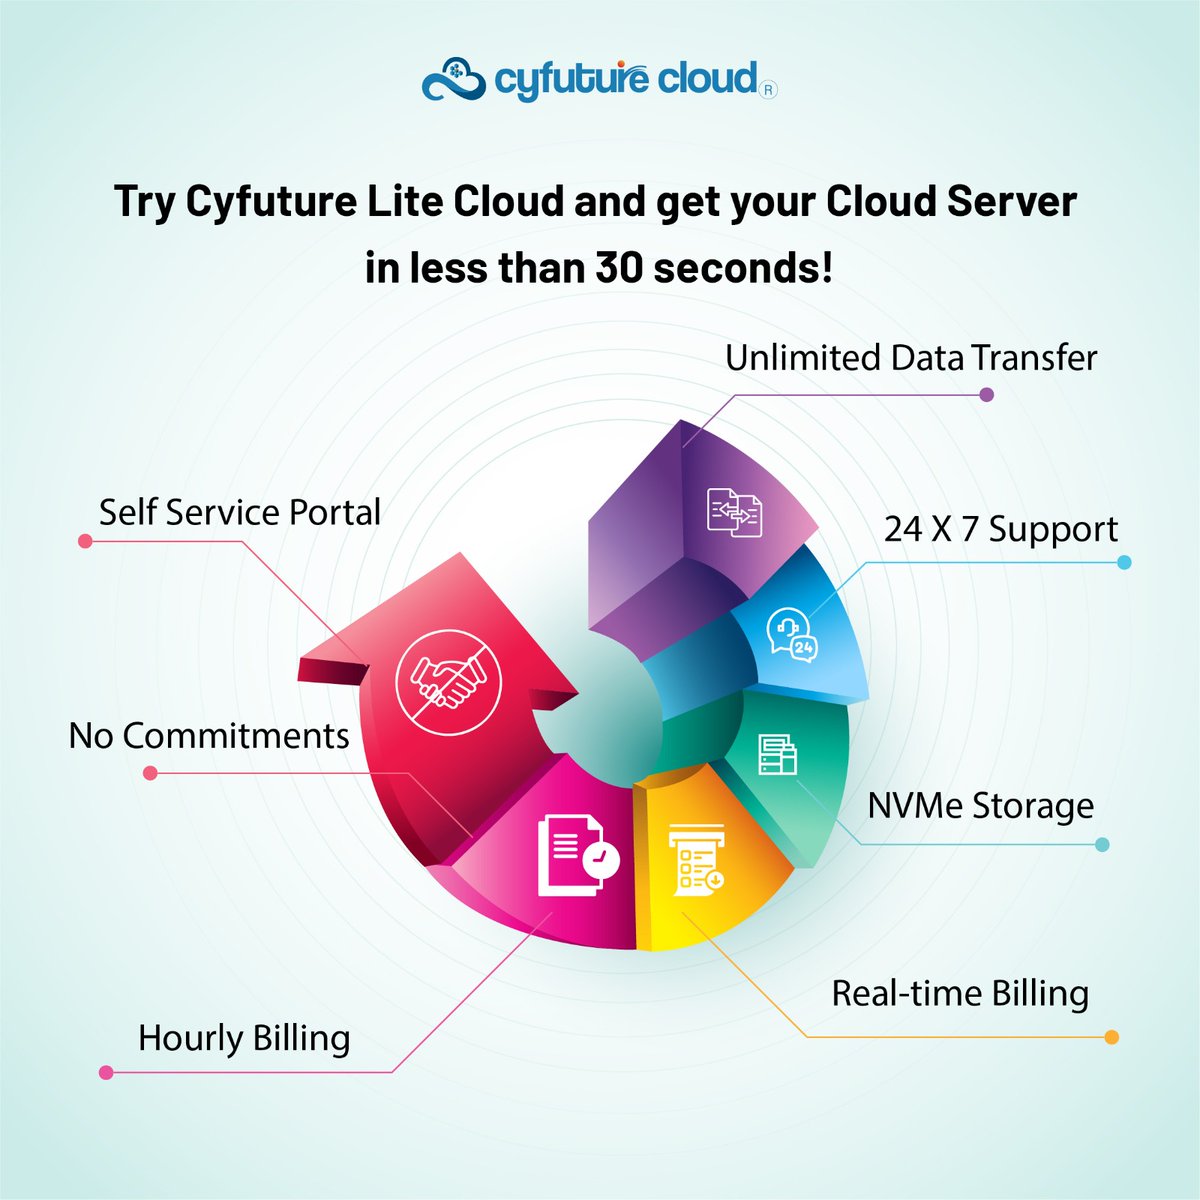 Are you looking for the fastest cloud platform ever in the market?
Now is the time to supercharge your cloud experience with Cyfuture Lite Cloud! 
#cloudcomputing #litecloud #networking #efficiency 
#cyfuturecloud #cyfuture